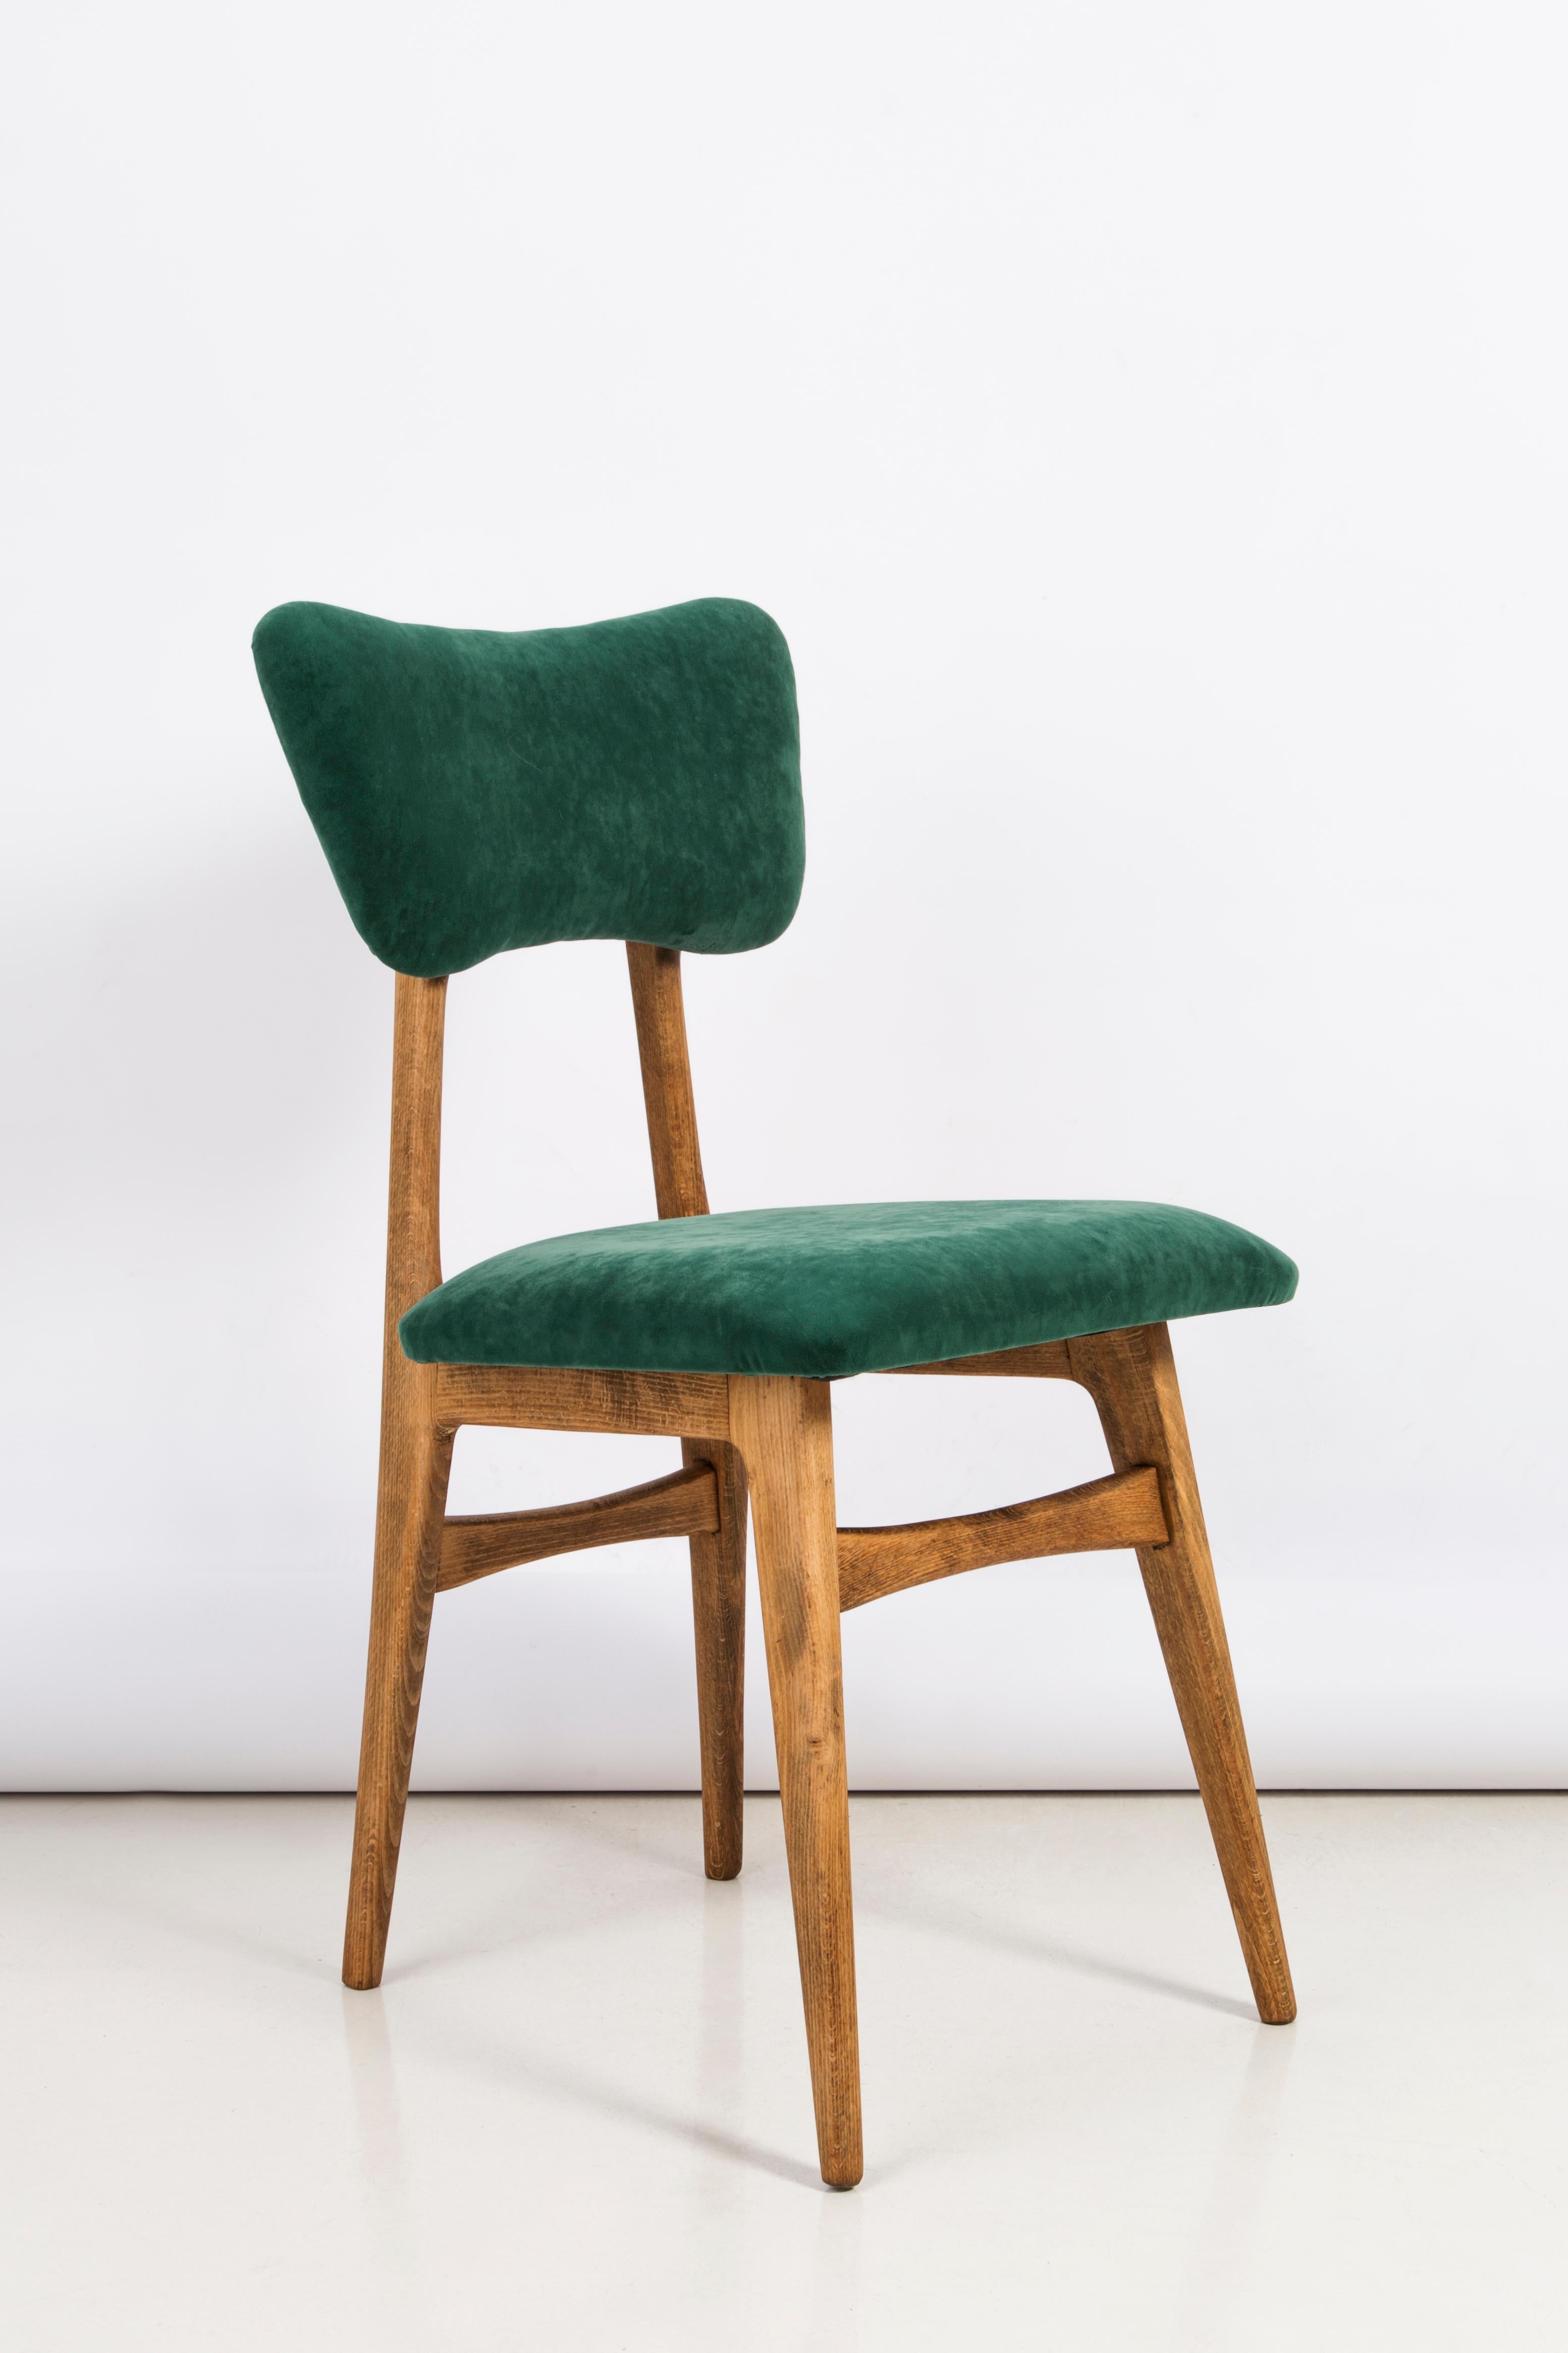 This type of chair is designed by prof. Rajmund Halas. Made of beechwood. Chairs are after a complete upholstery renovation, the woodwork has been refreshed. Seat and back is dressed in a dark green, durable and pleasant to the touch velvet fabric.